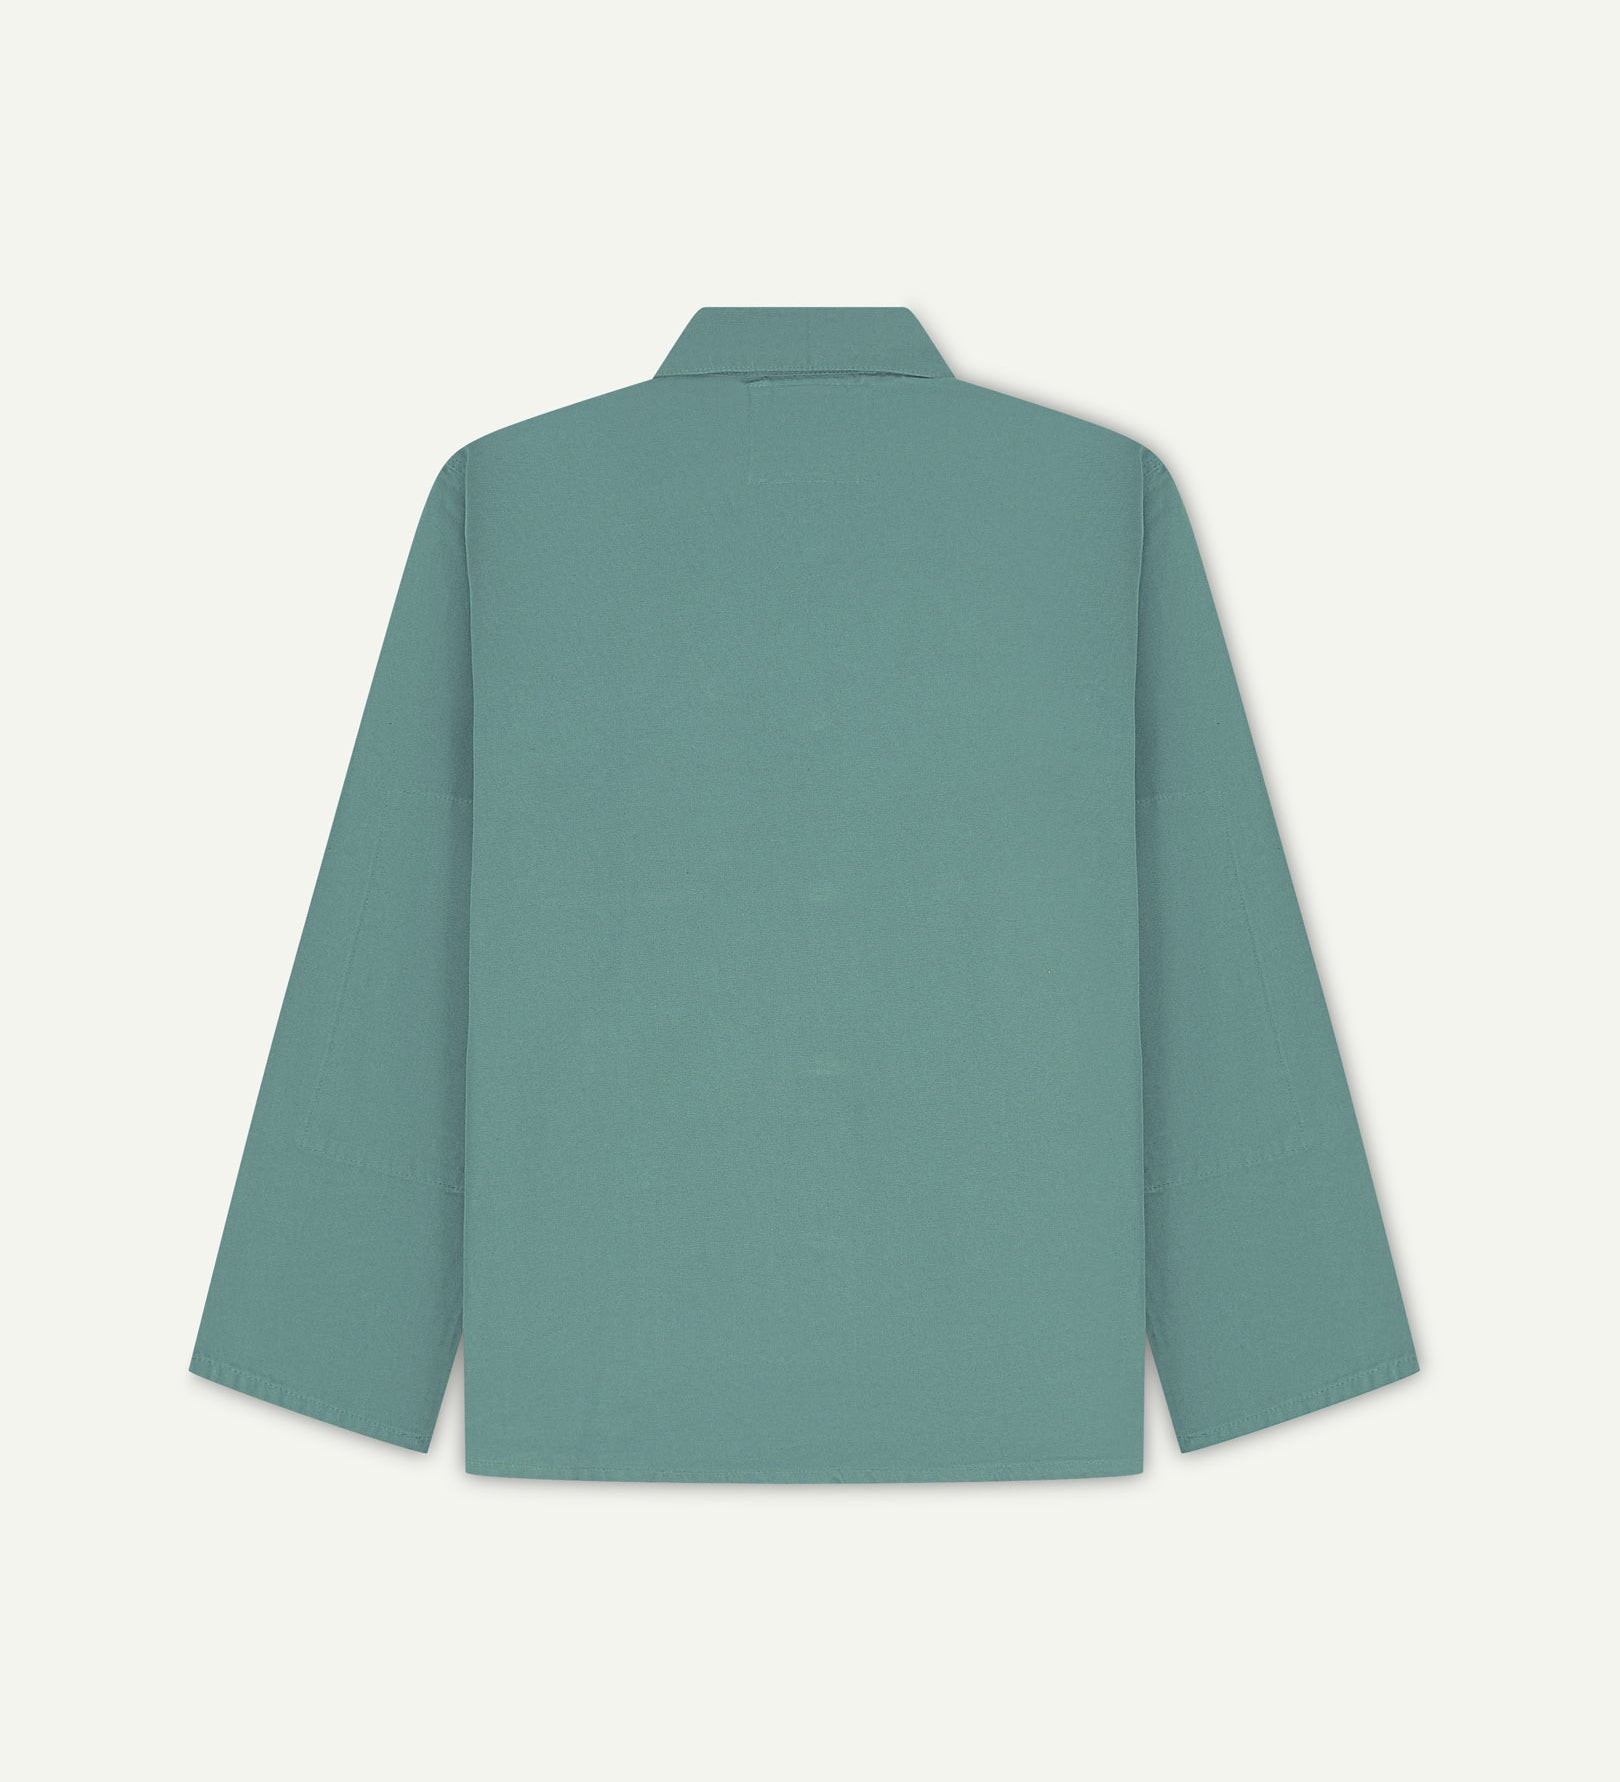 Back view of blue-green (eucalyptus), buttoned organic cotton overshirt with view of reinforced elbow area and boxy silhouette.